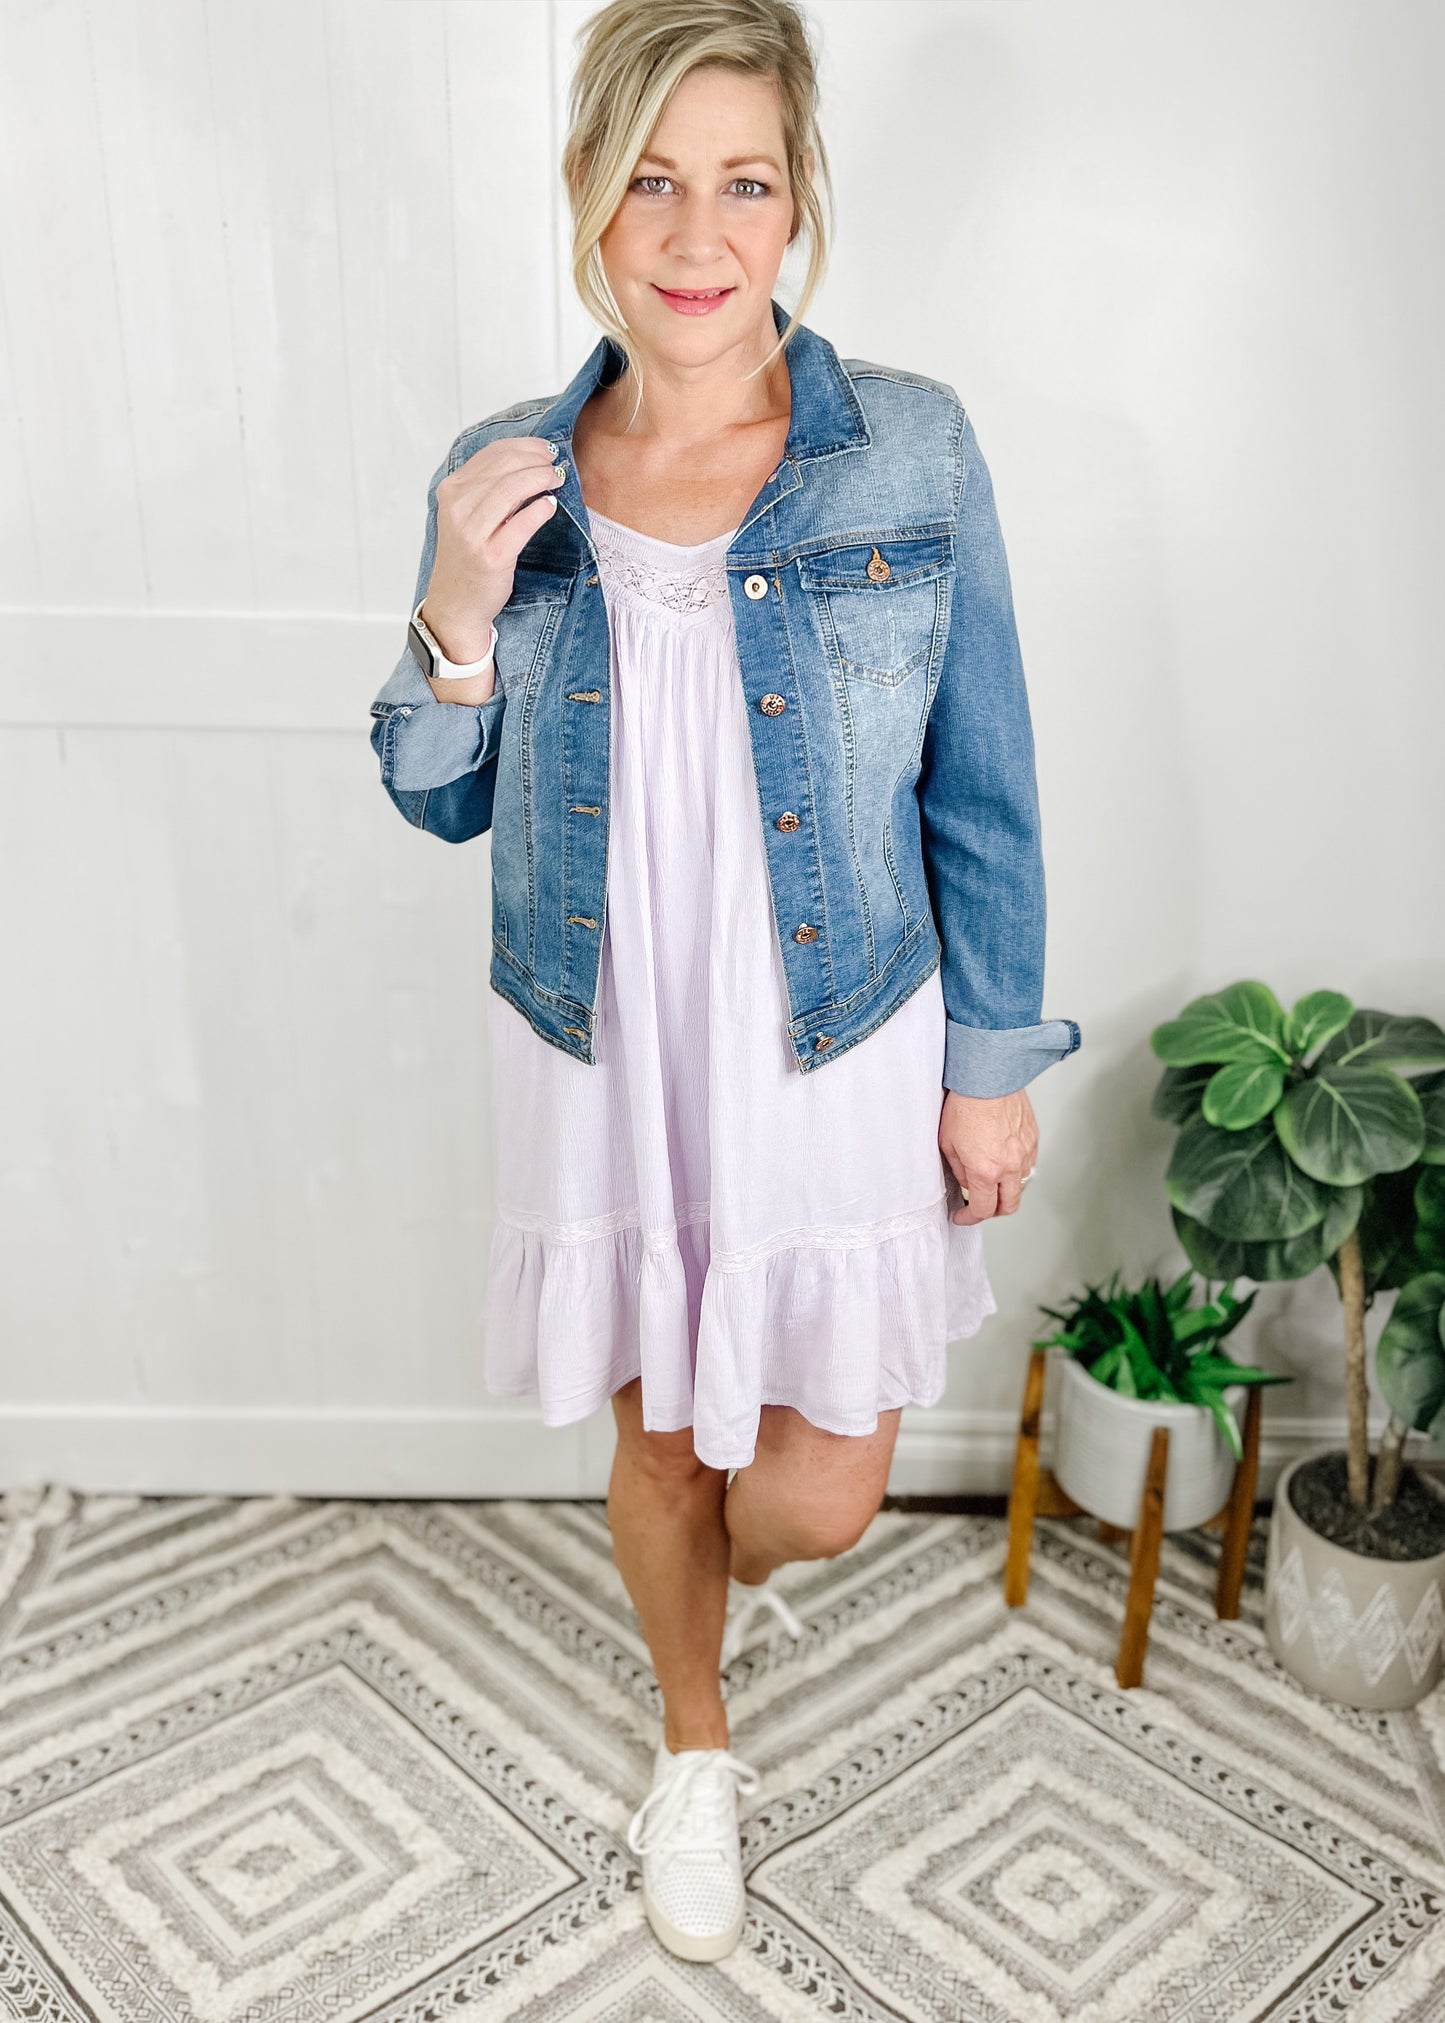 Lilac dress with tassel ties at shoulders, slight v neckline with lace boarder. Dress seis knee length and has a ruffle bottom. Shown with our short denim jacket. 